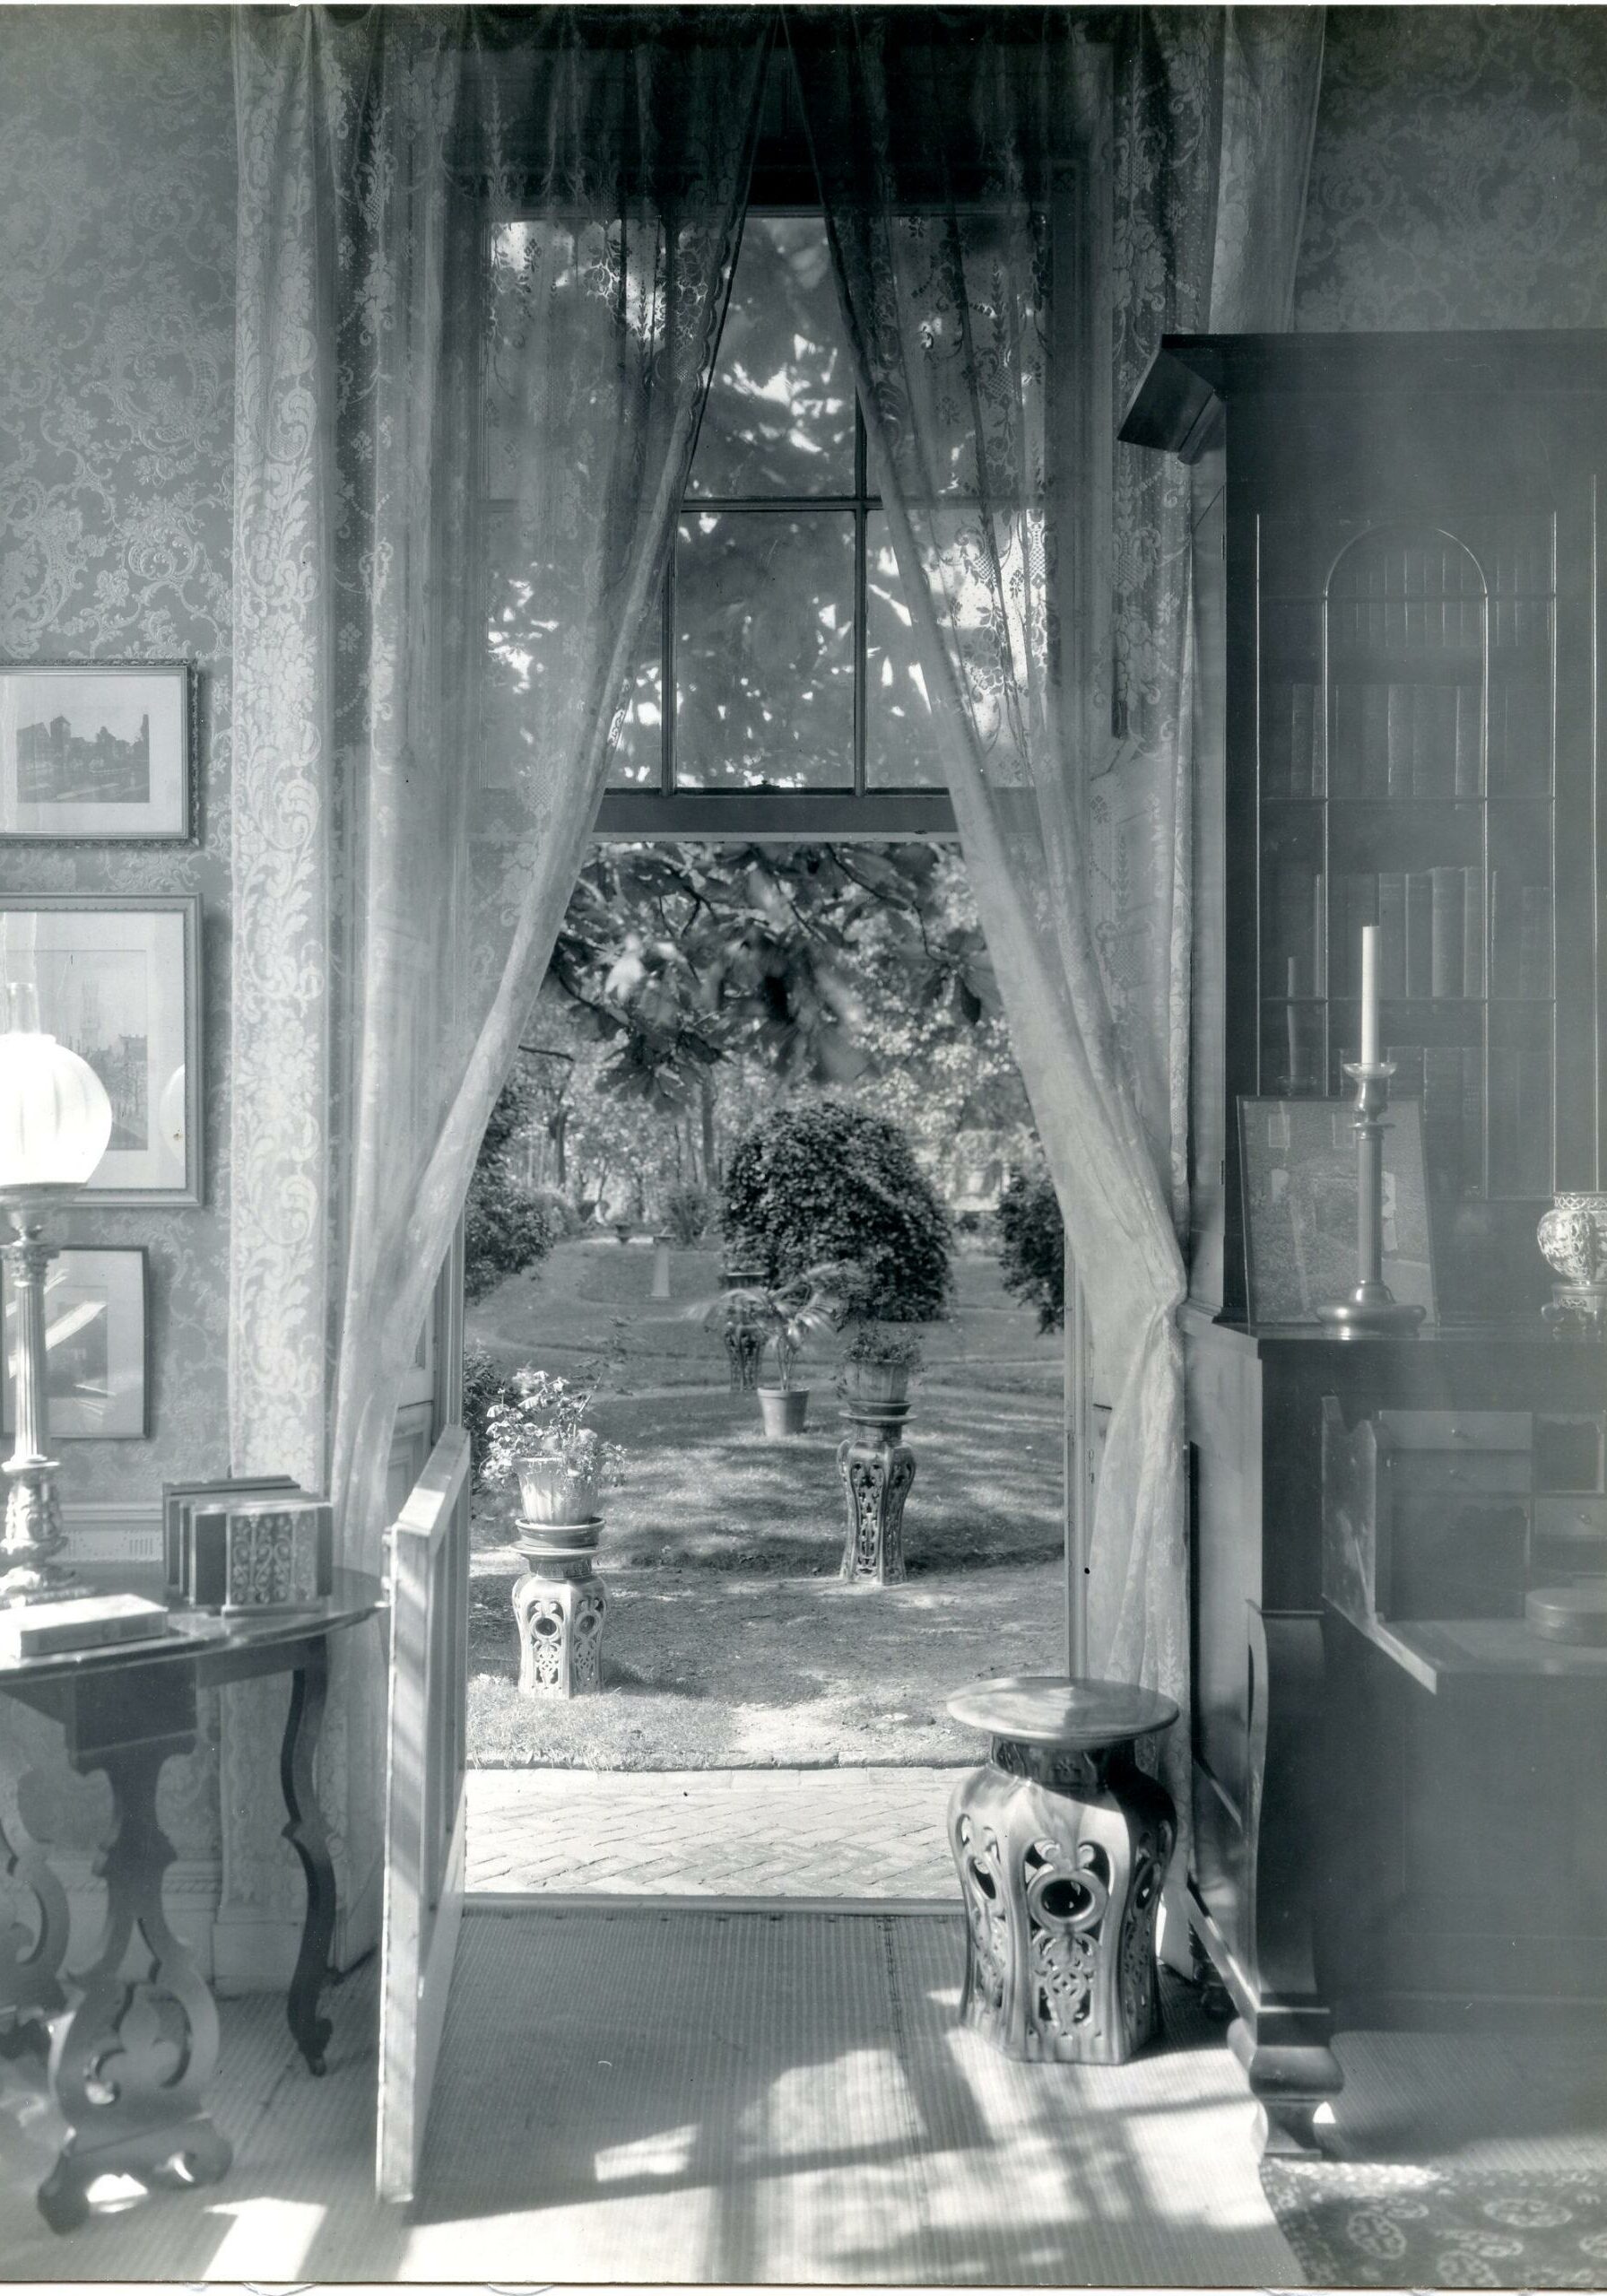 black-and-white historic photograph of an open window